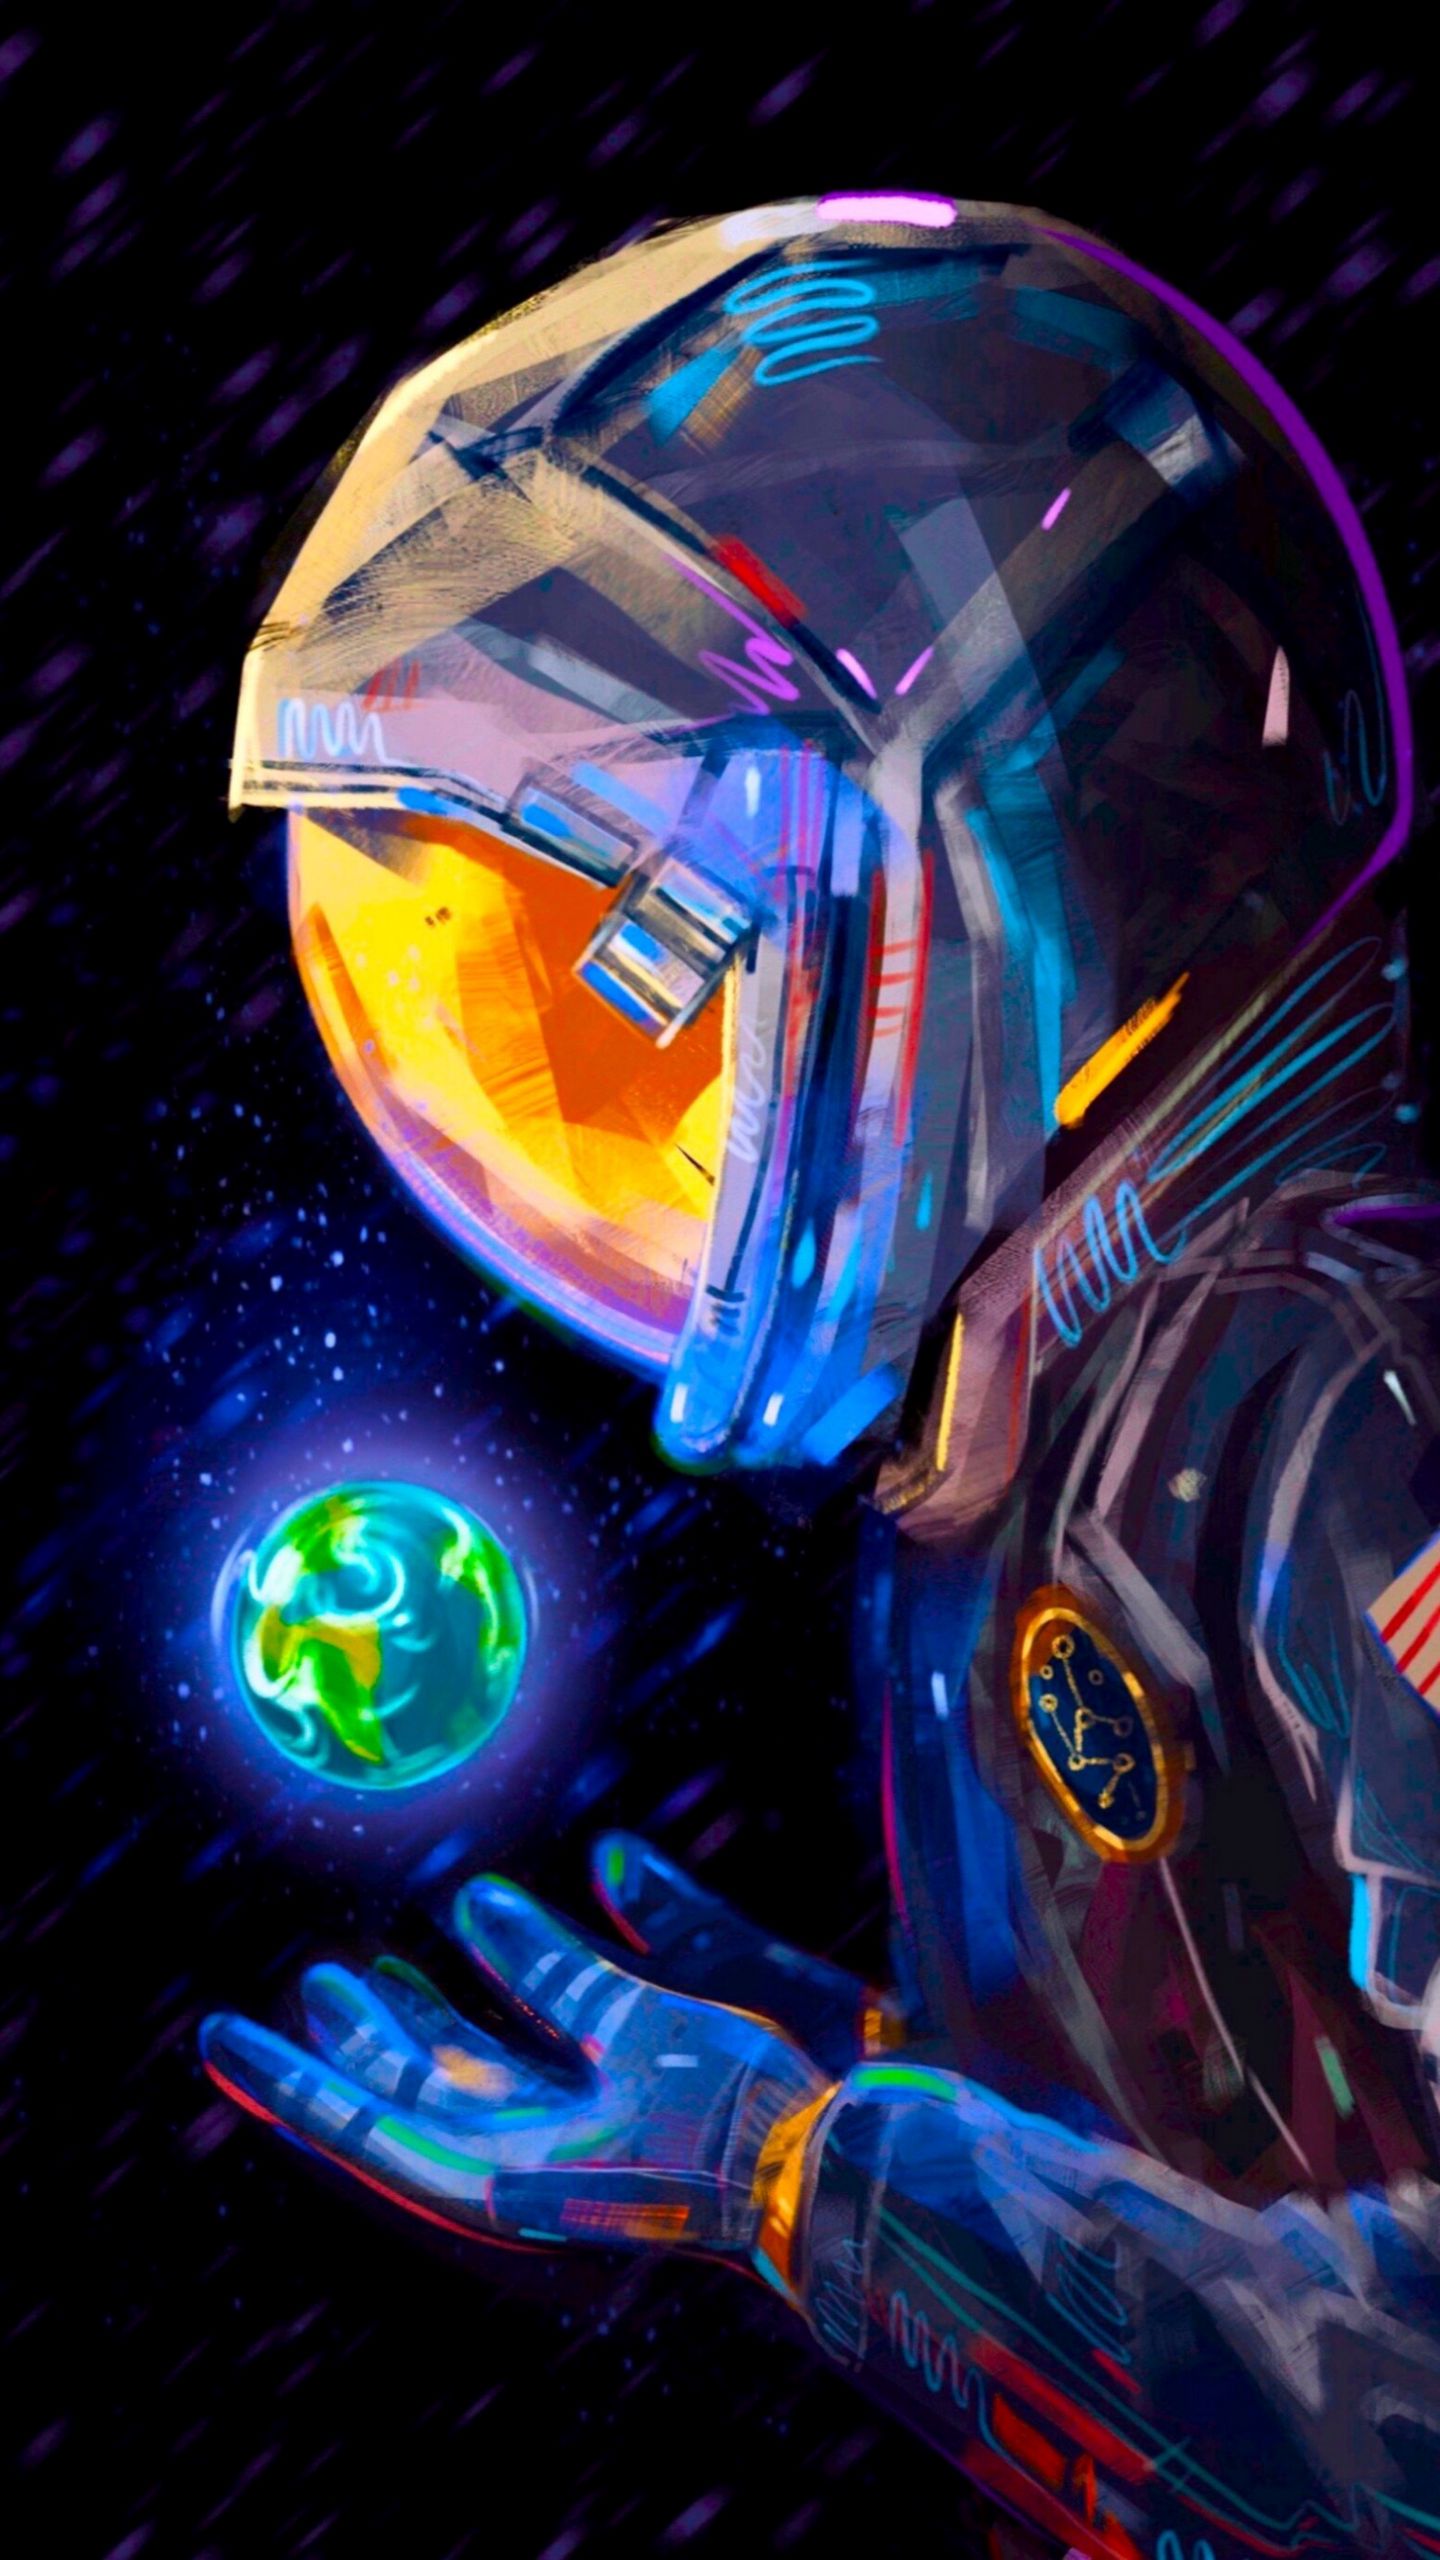 Download wallpaper 1440x2560 astronaut spacesuit earth planet art qhd  samsung galaxy s6 s7 edge note lg g4 hd background